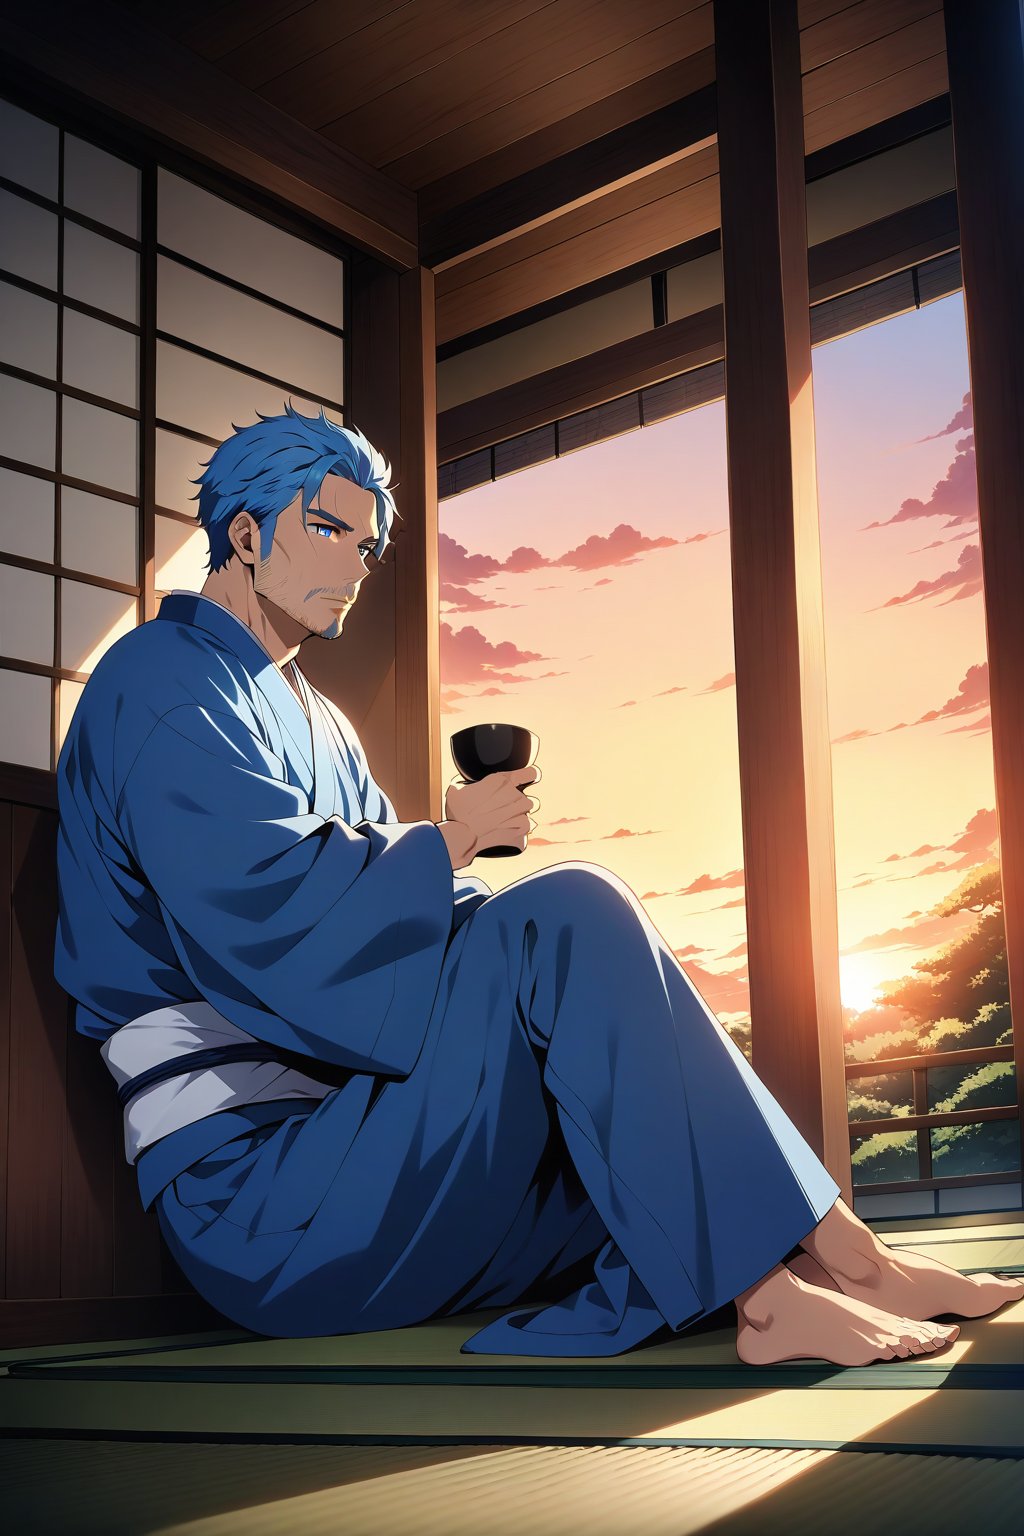 (masterpiece, best quality, 32k ultra HD anime quality, super high resolution, anatomically accurate, perfect anatomy),
(bercouli), mature_man, solo, looking at garden,
(blue_hair, short_hair,_bangs_hanging_on_one_side,_blue_eyes,_sparse_beard,_stubble,_lonely_face),
(Japanese_clothes,_blue_kimono,_white_sash), barefoot,
(four_toes,_one_thumb),
(drinking_from_a_ceramic_Japanese_cup,_hunched_back,_sitting_on_the_porch,_crossed_legs,_in_a_Japanese_room),
(view_of_a_Japanese_house,_tatami_Japanese_room,_wooden_porch,_red_garden,_small_Japanese_garden,_evening,_sunset),
(side_view,_diagonal_angle_from_below_behind),
score_9,score_8_up,score_7_up,score_6_up,